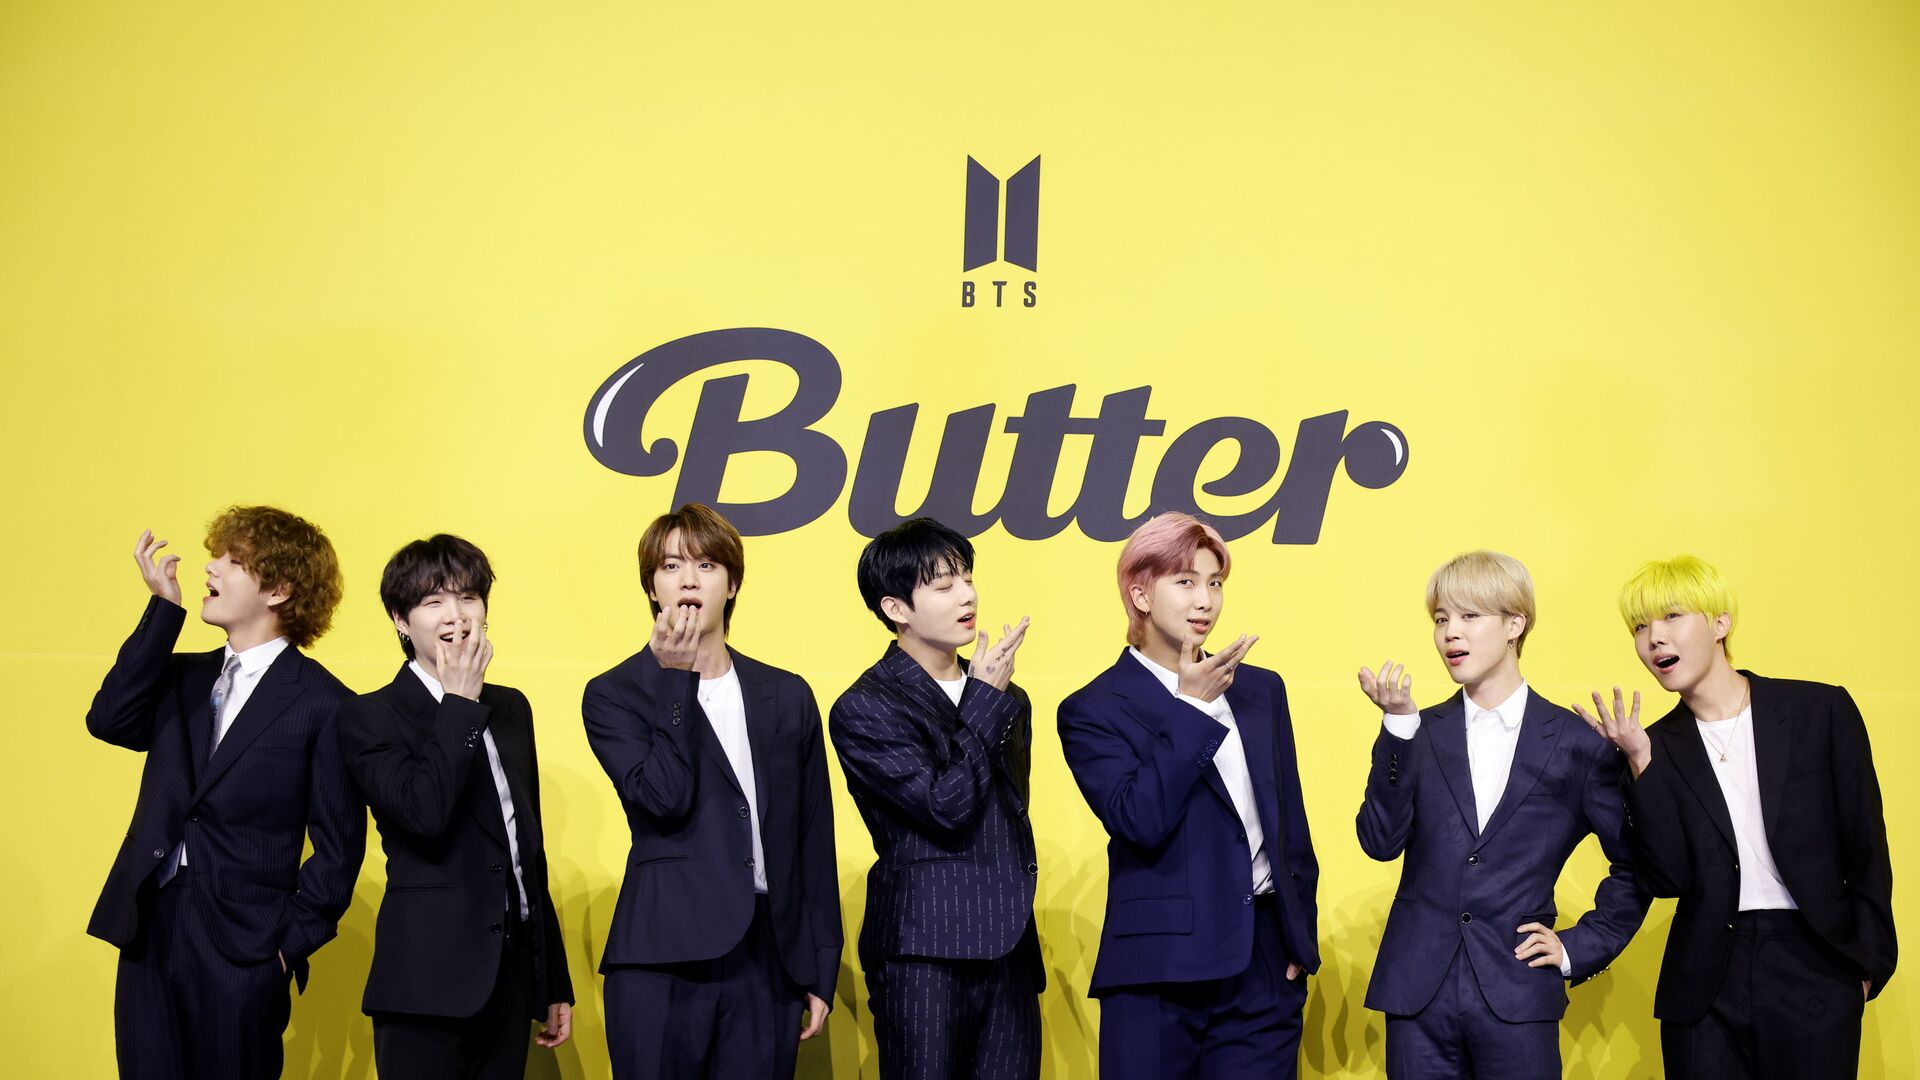 Members of K-pop boy band BTS pose for photographs during a photo opportunity promoting their new single 'Butter' in Seoul - Sputnik International, 1920, 05.07.2021